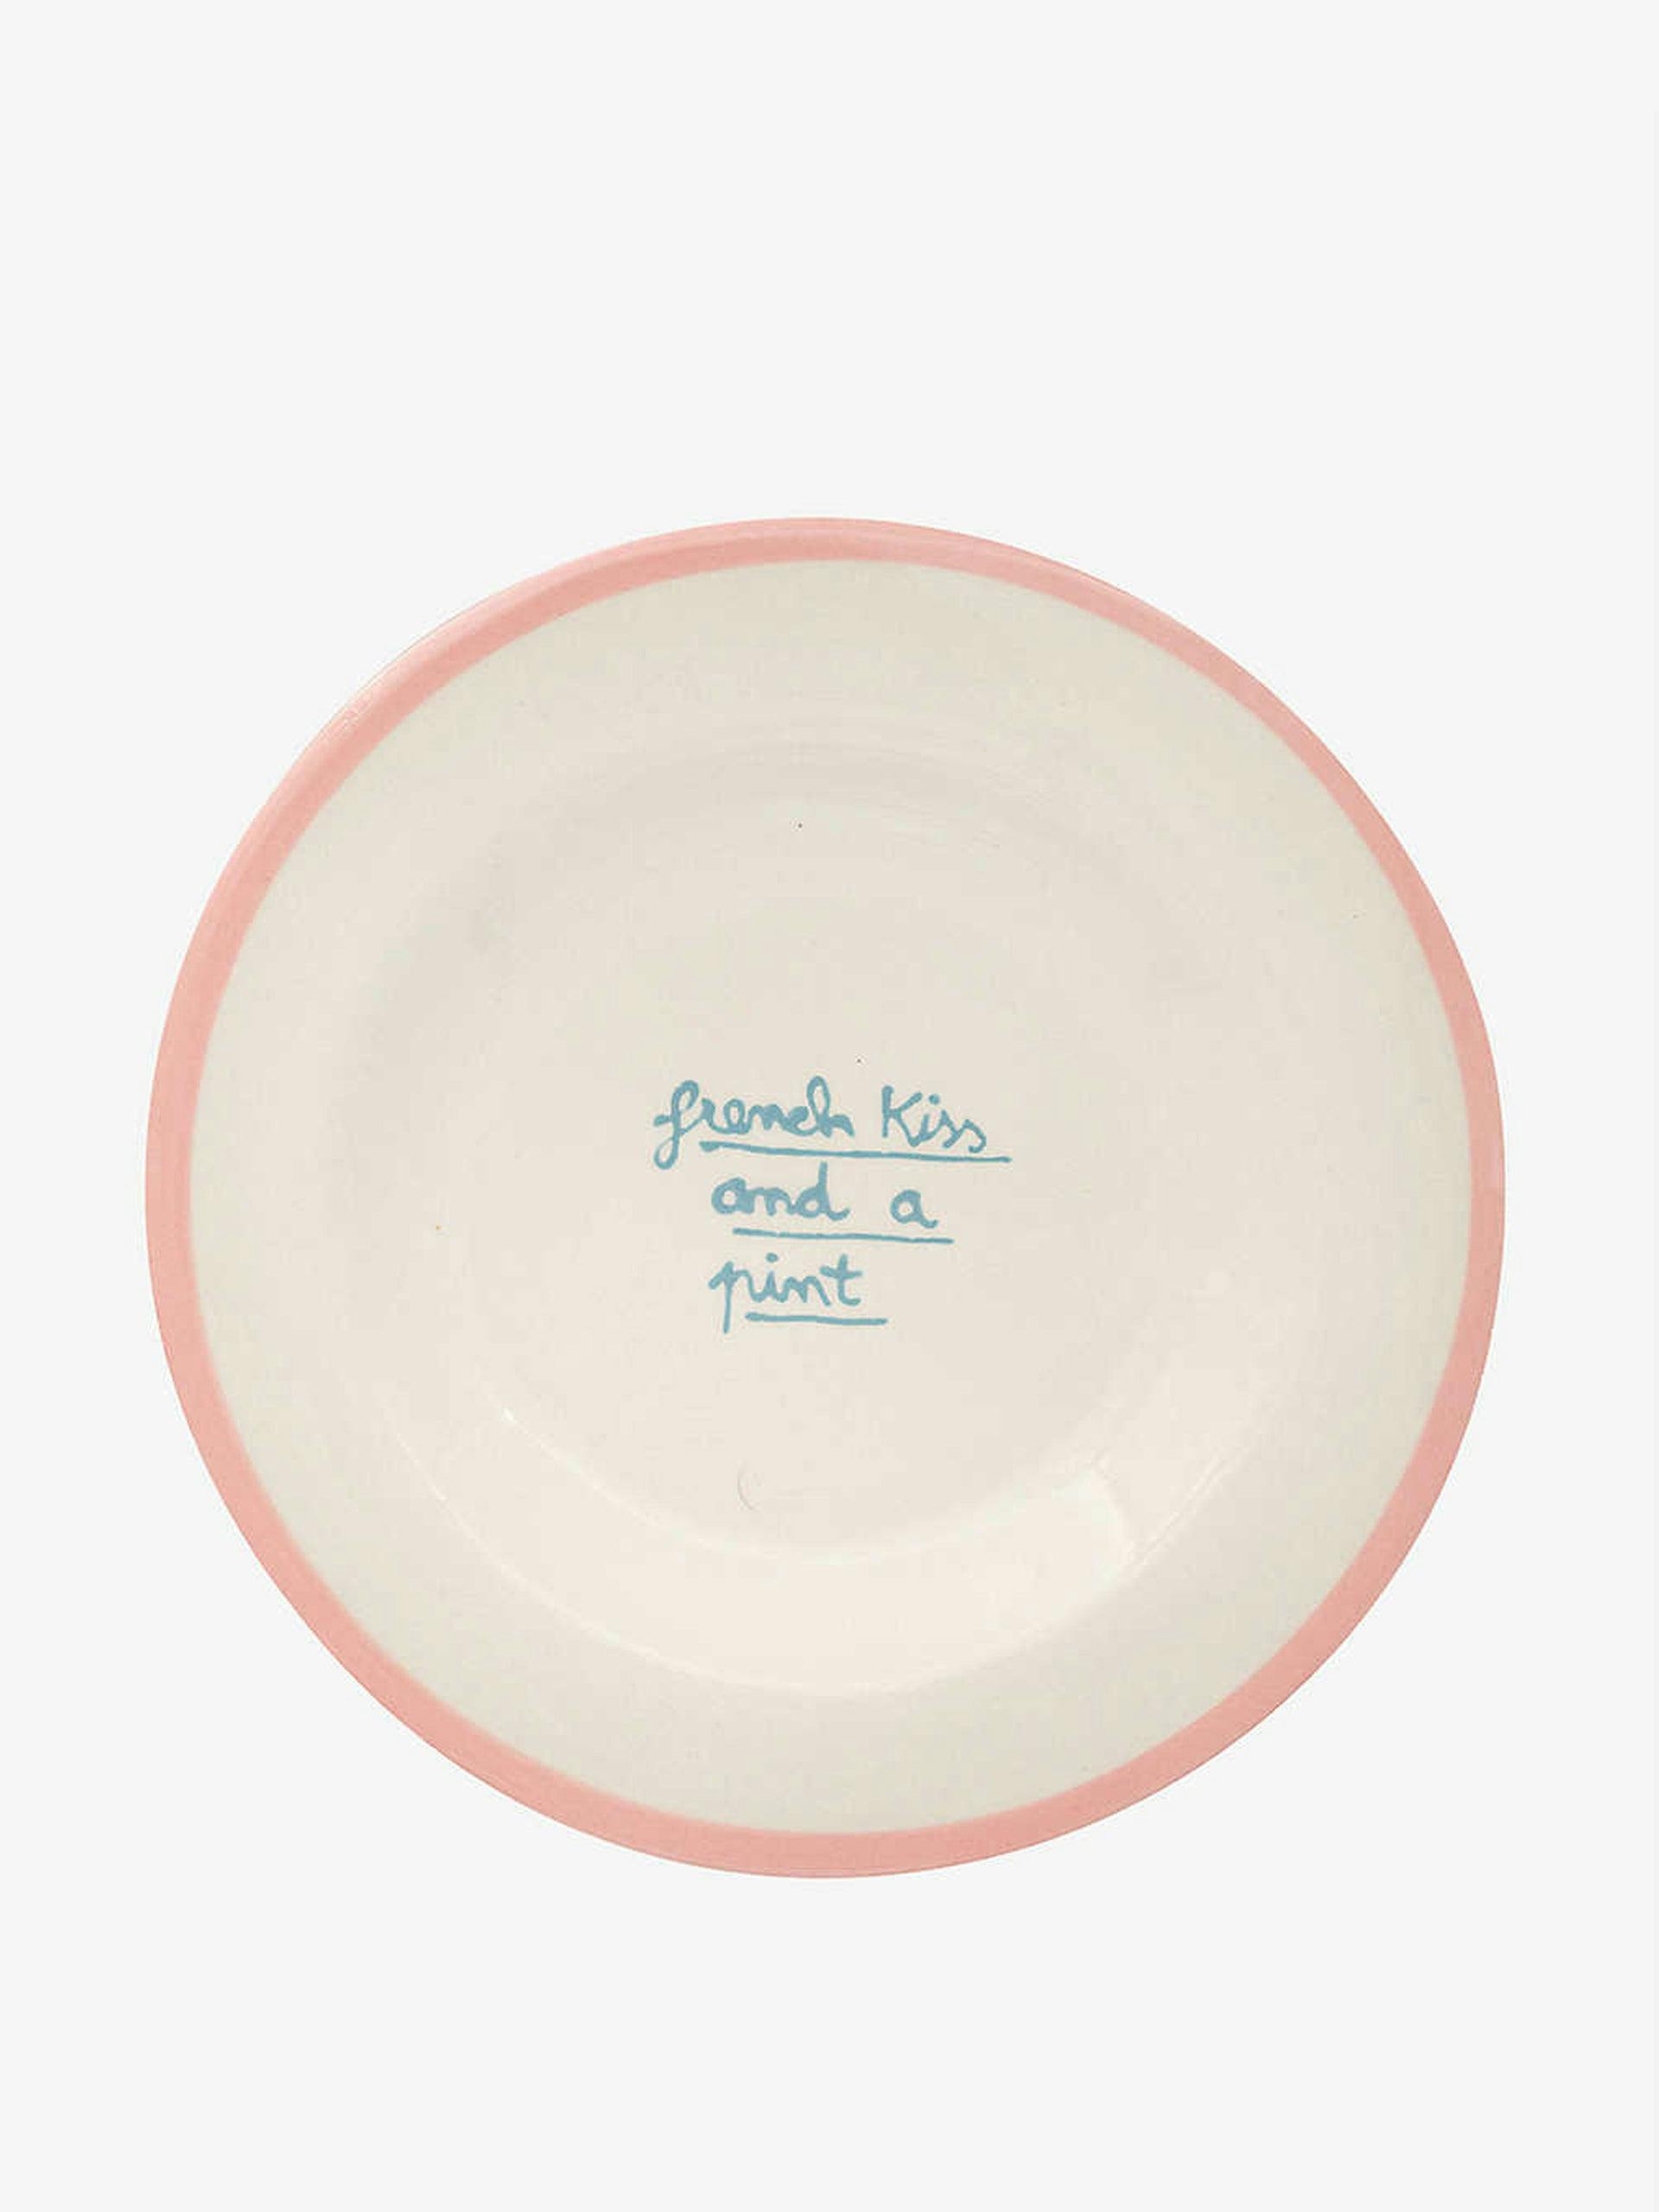 French Kiss hand-painted ceramic plate